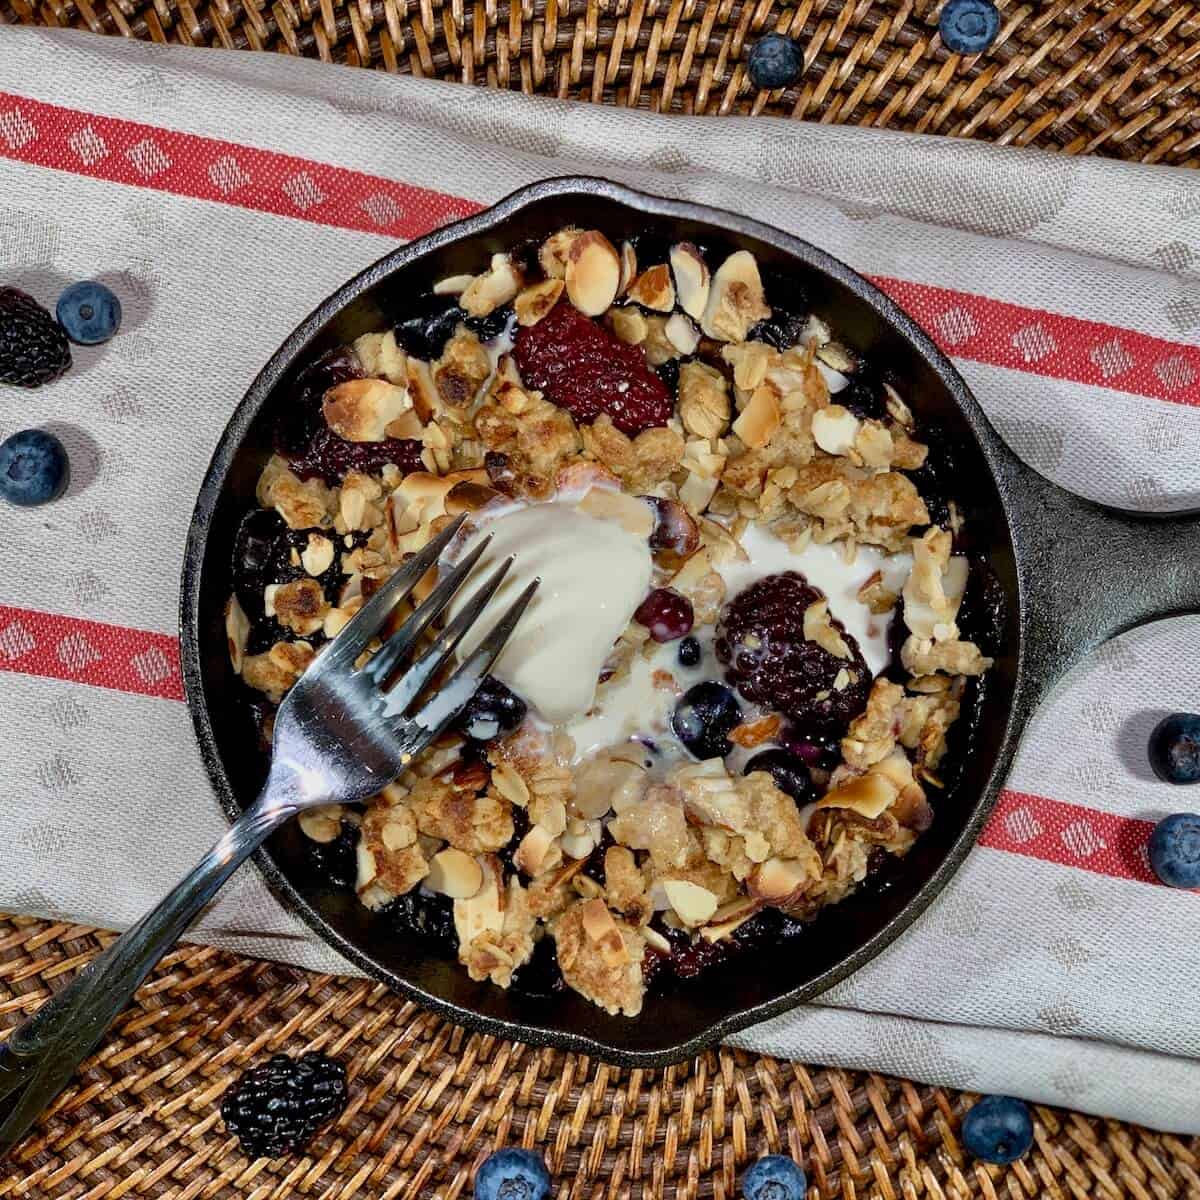 Mini Skillet Berry Crisp on a red & white striped towel with fork & scoop of vanilla ice cream surrounded by blueberries on a wooden tray from overhead.